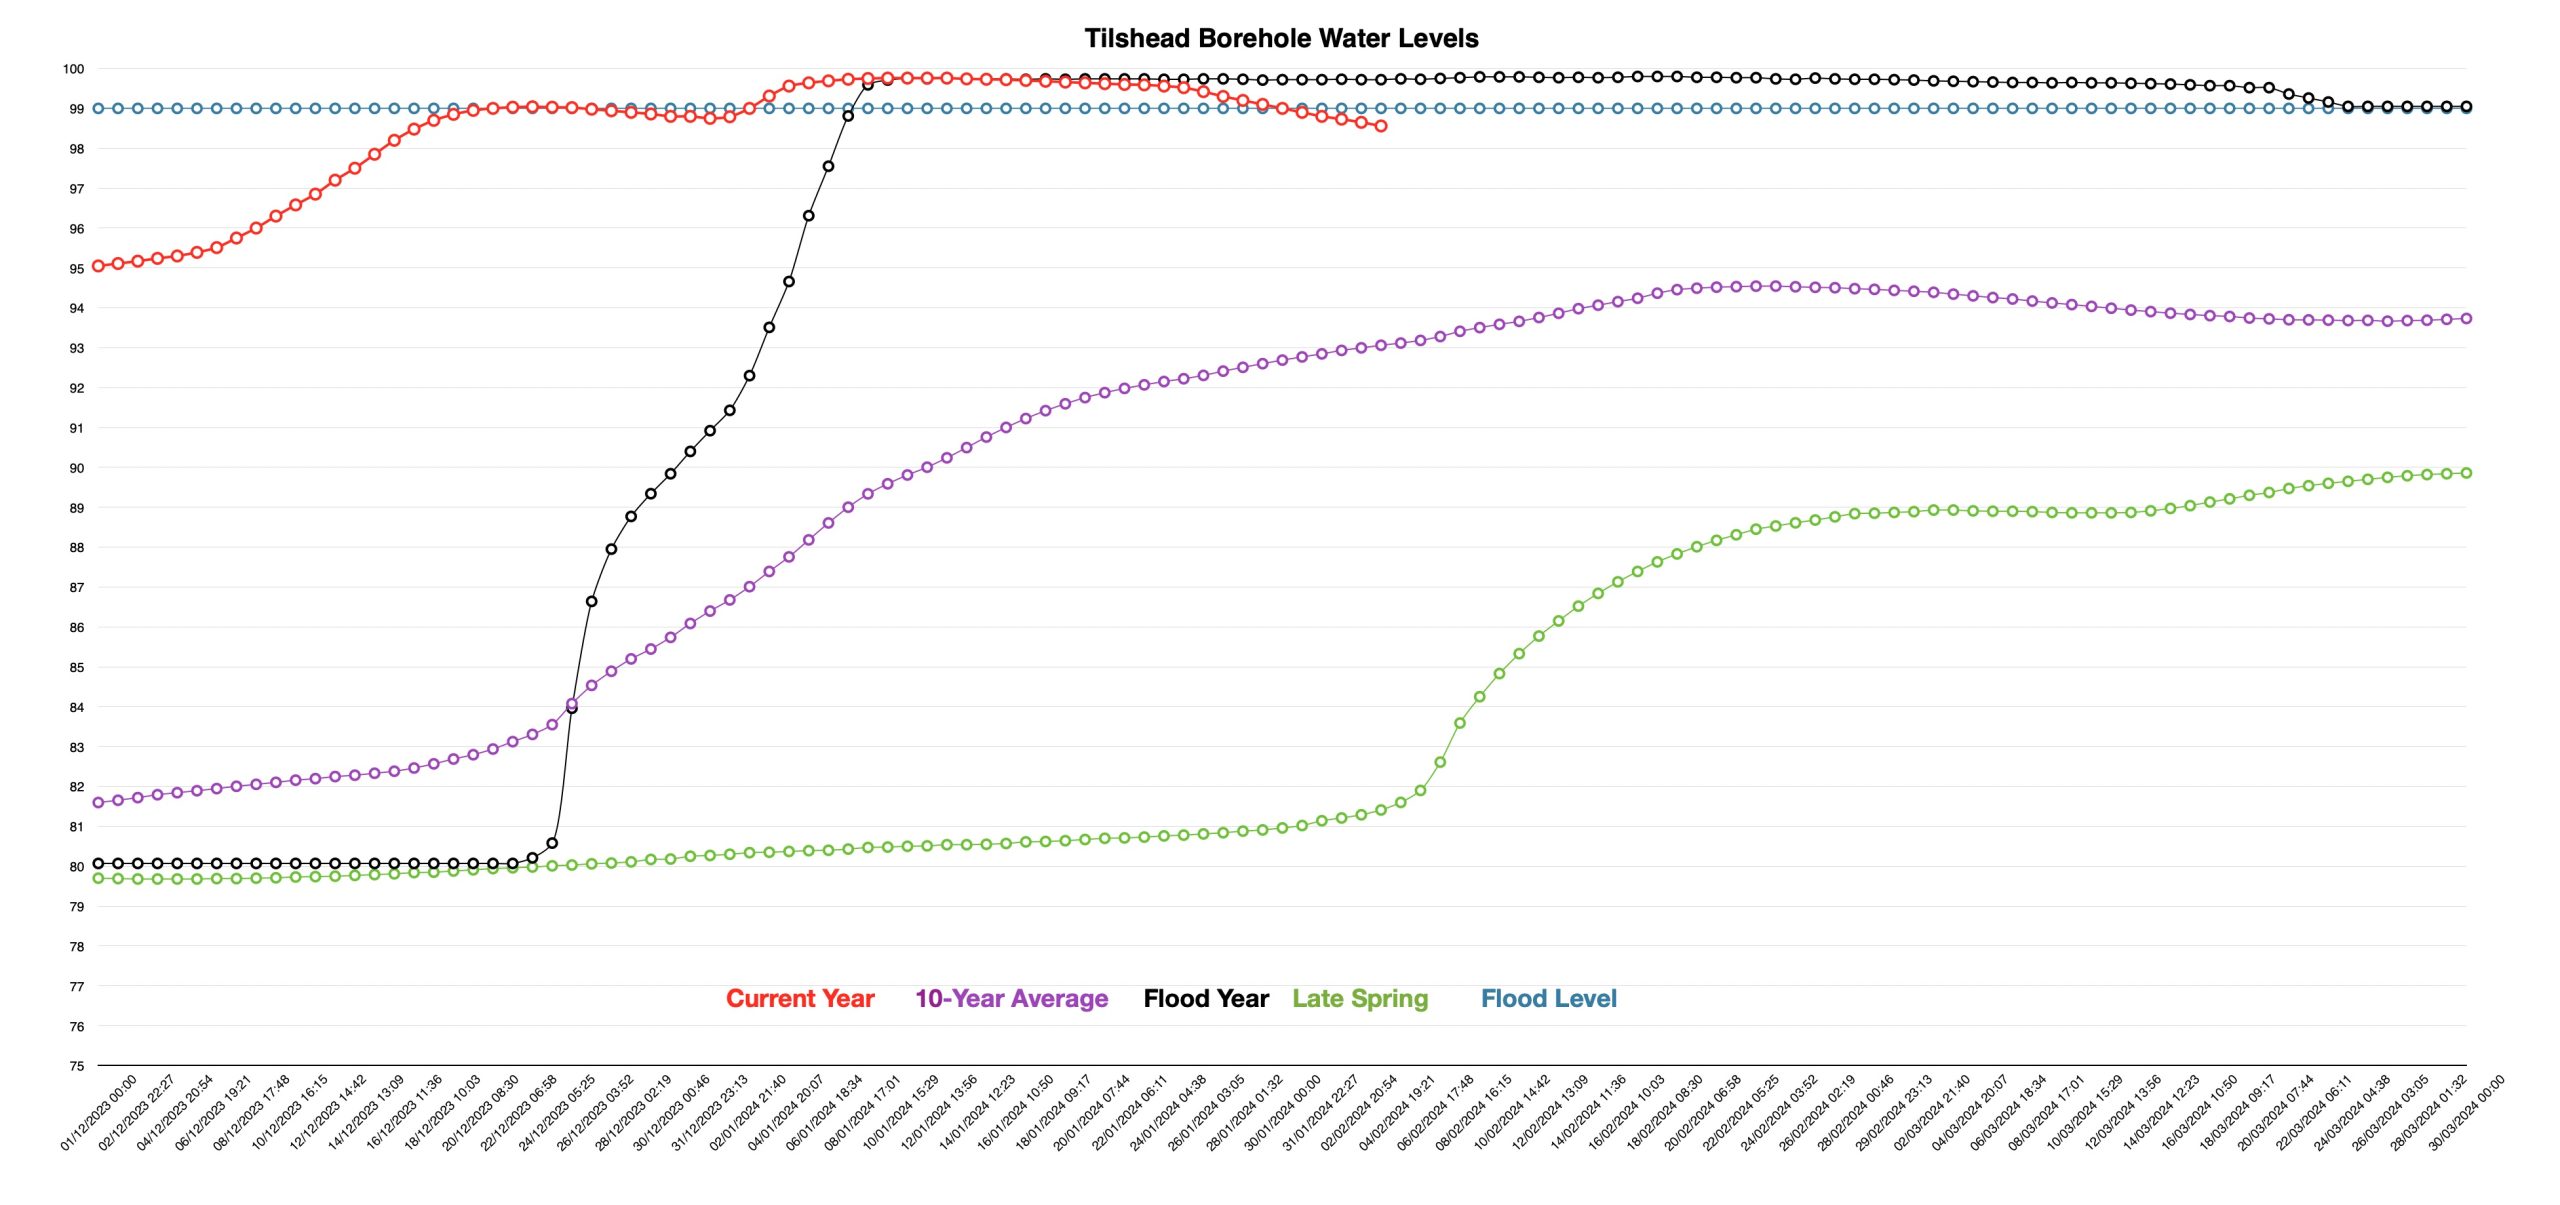 Another update on the borehole level which continues to fall steadily, if slowly.